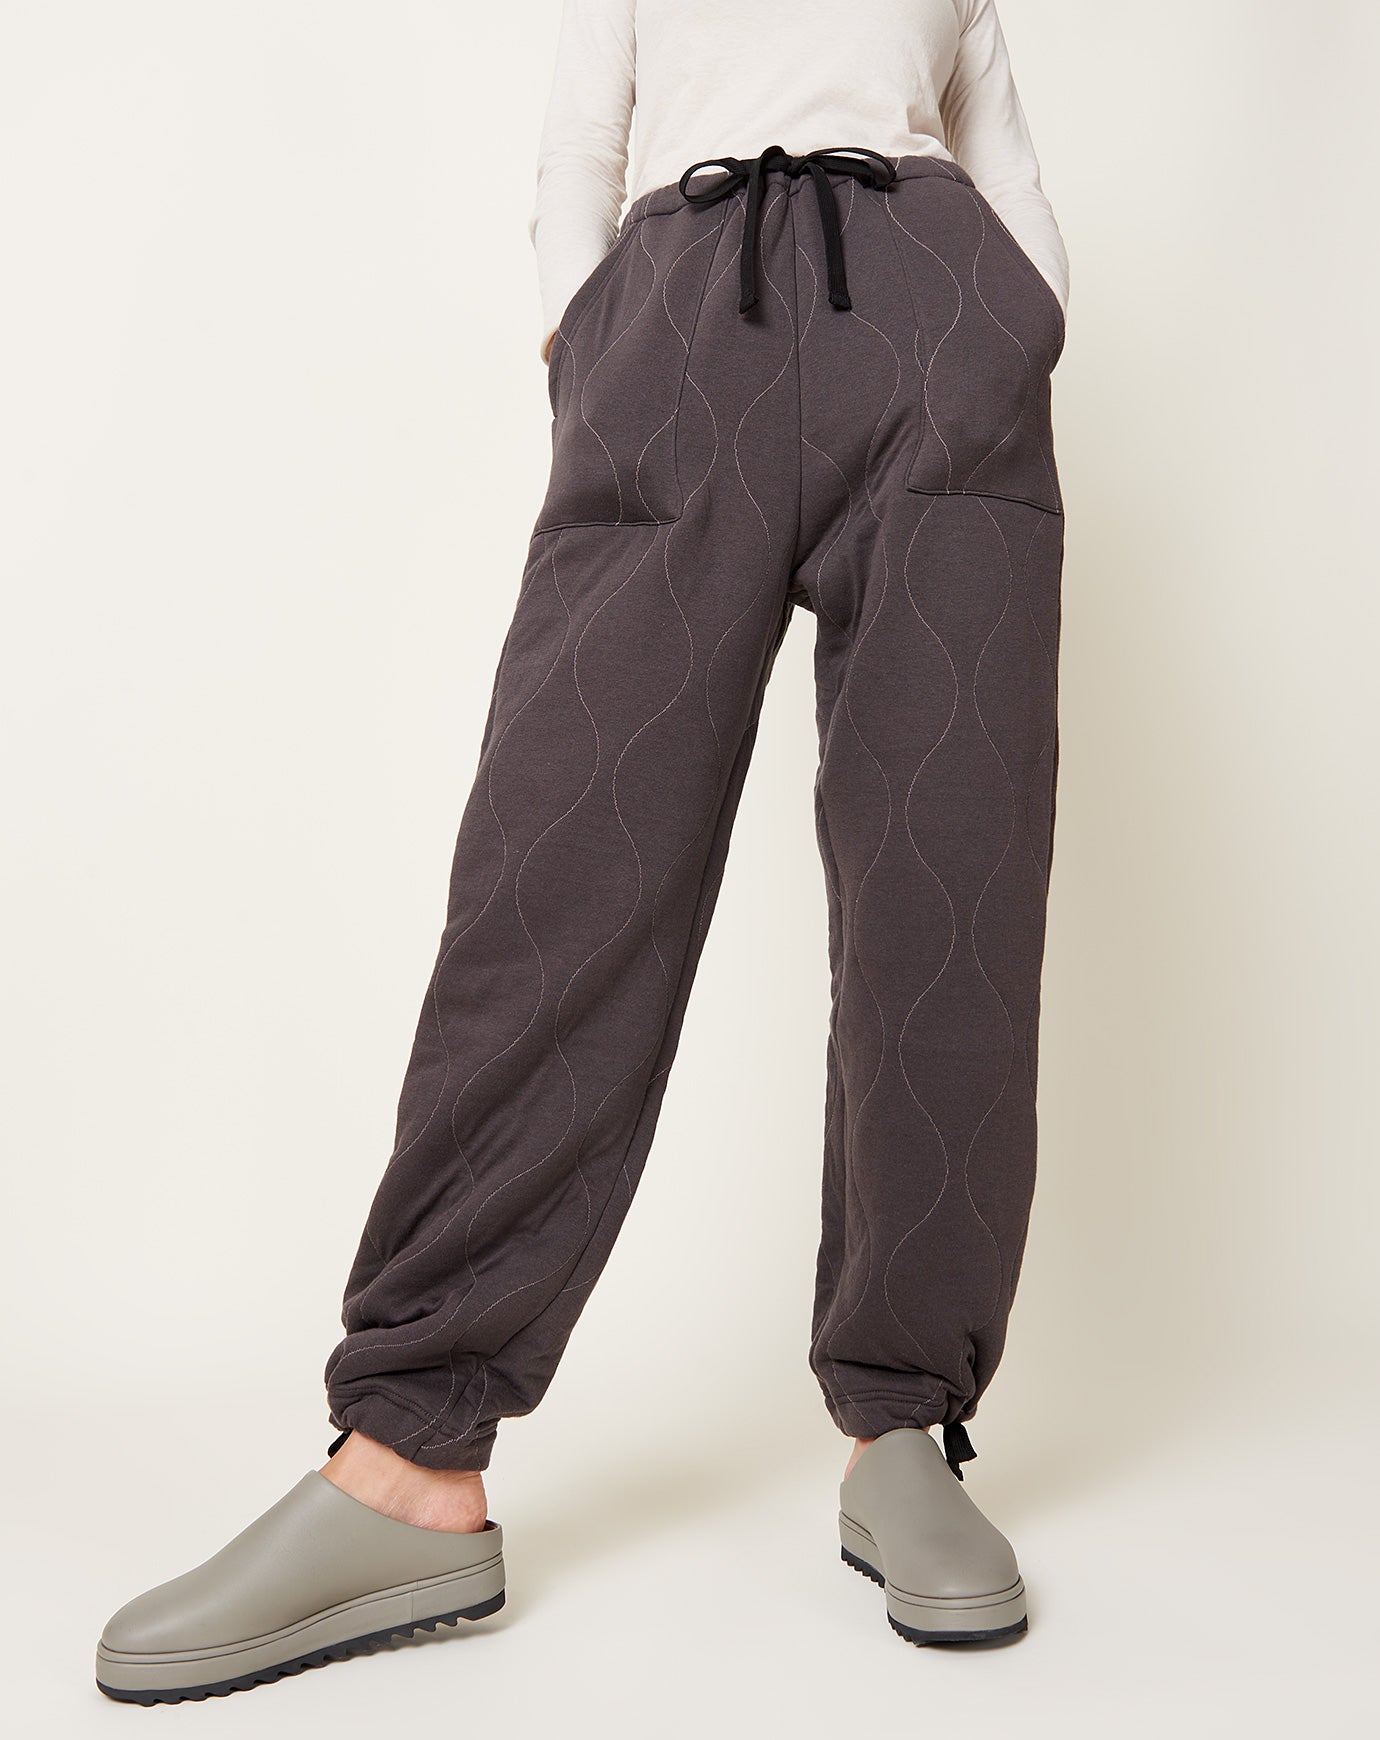 Chimala Quilted Drawstring Pants in Charcoal